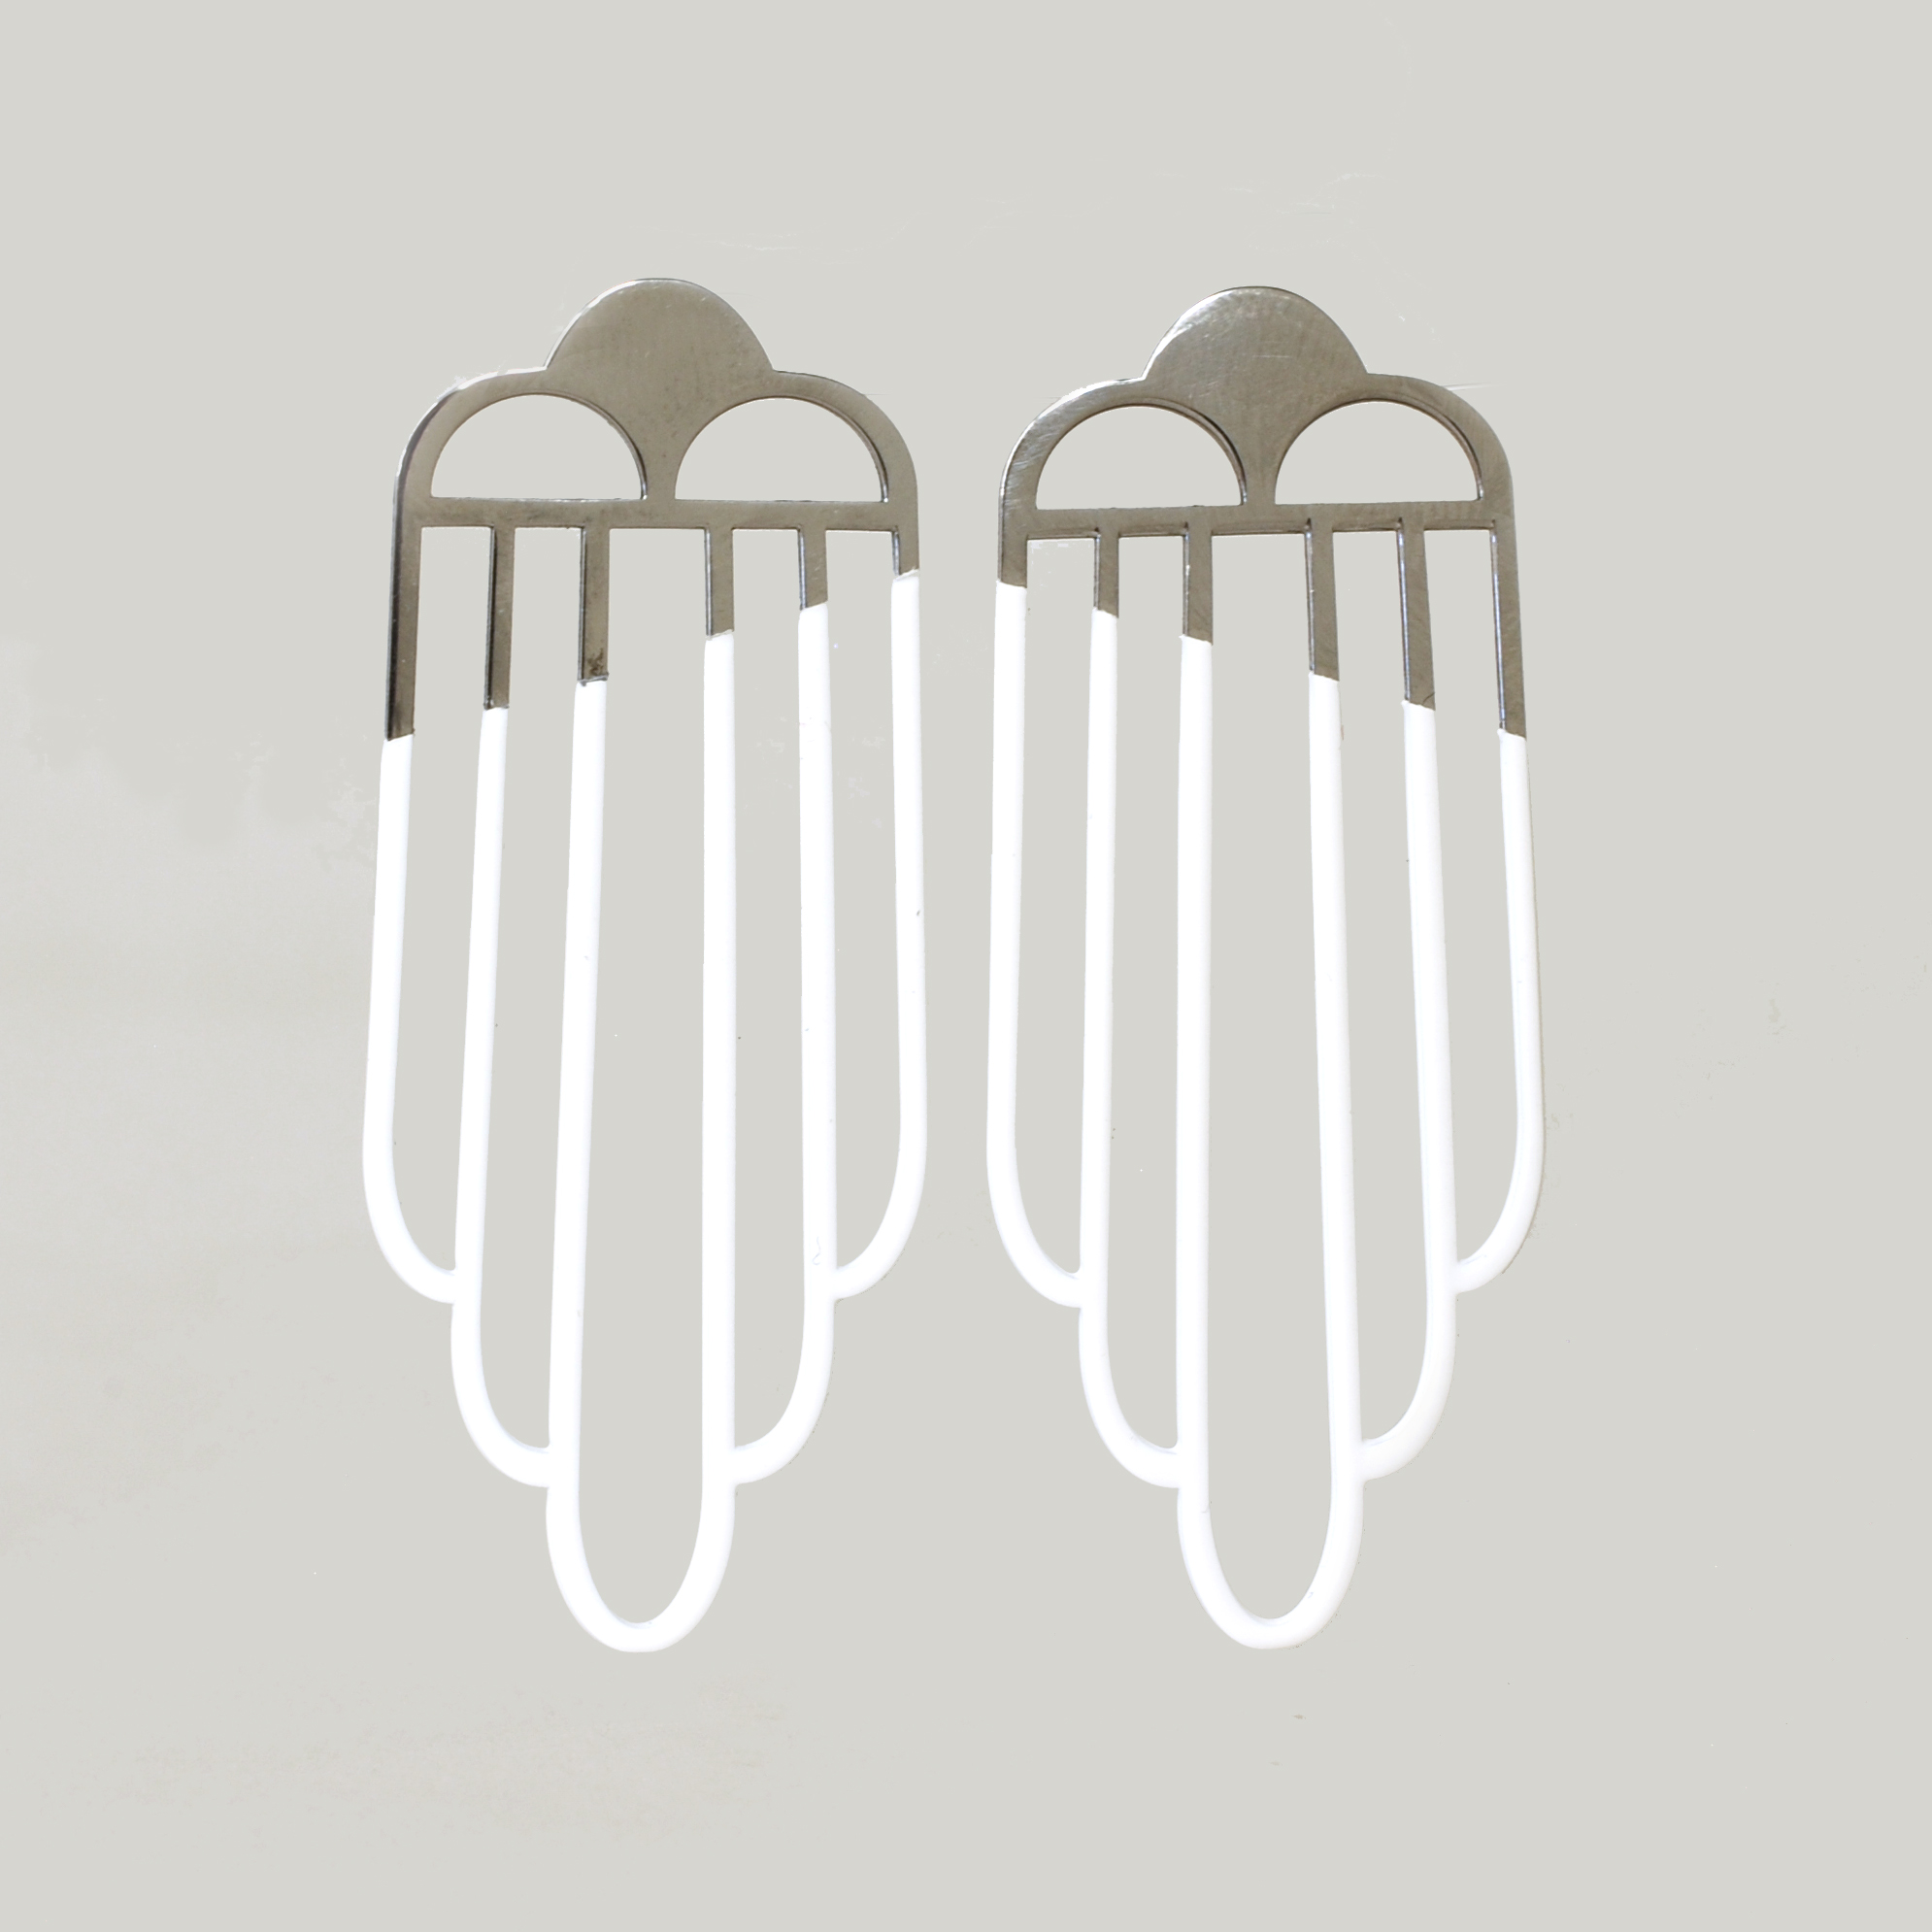 Tower Earrings – White and Stainless Steel